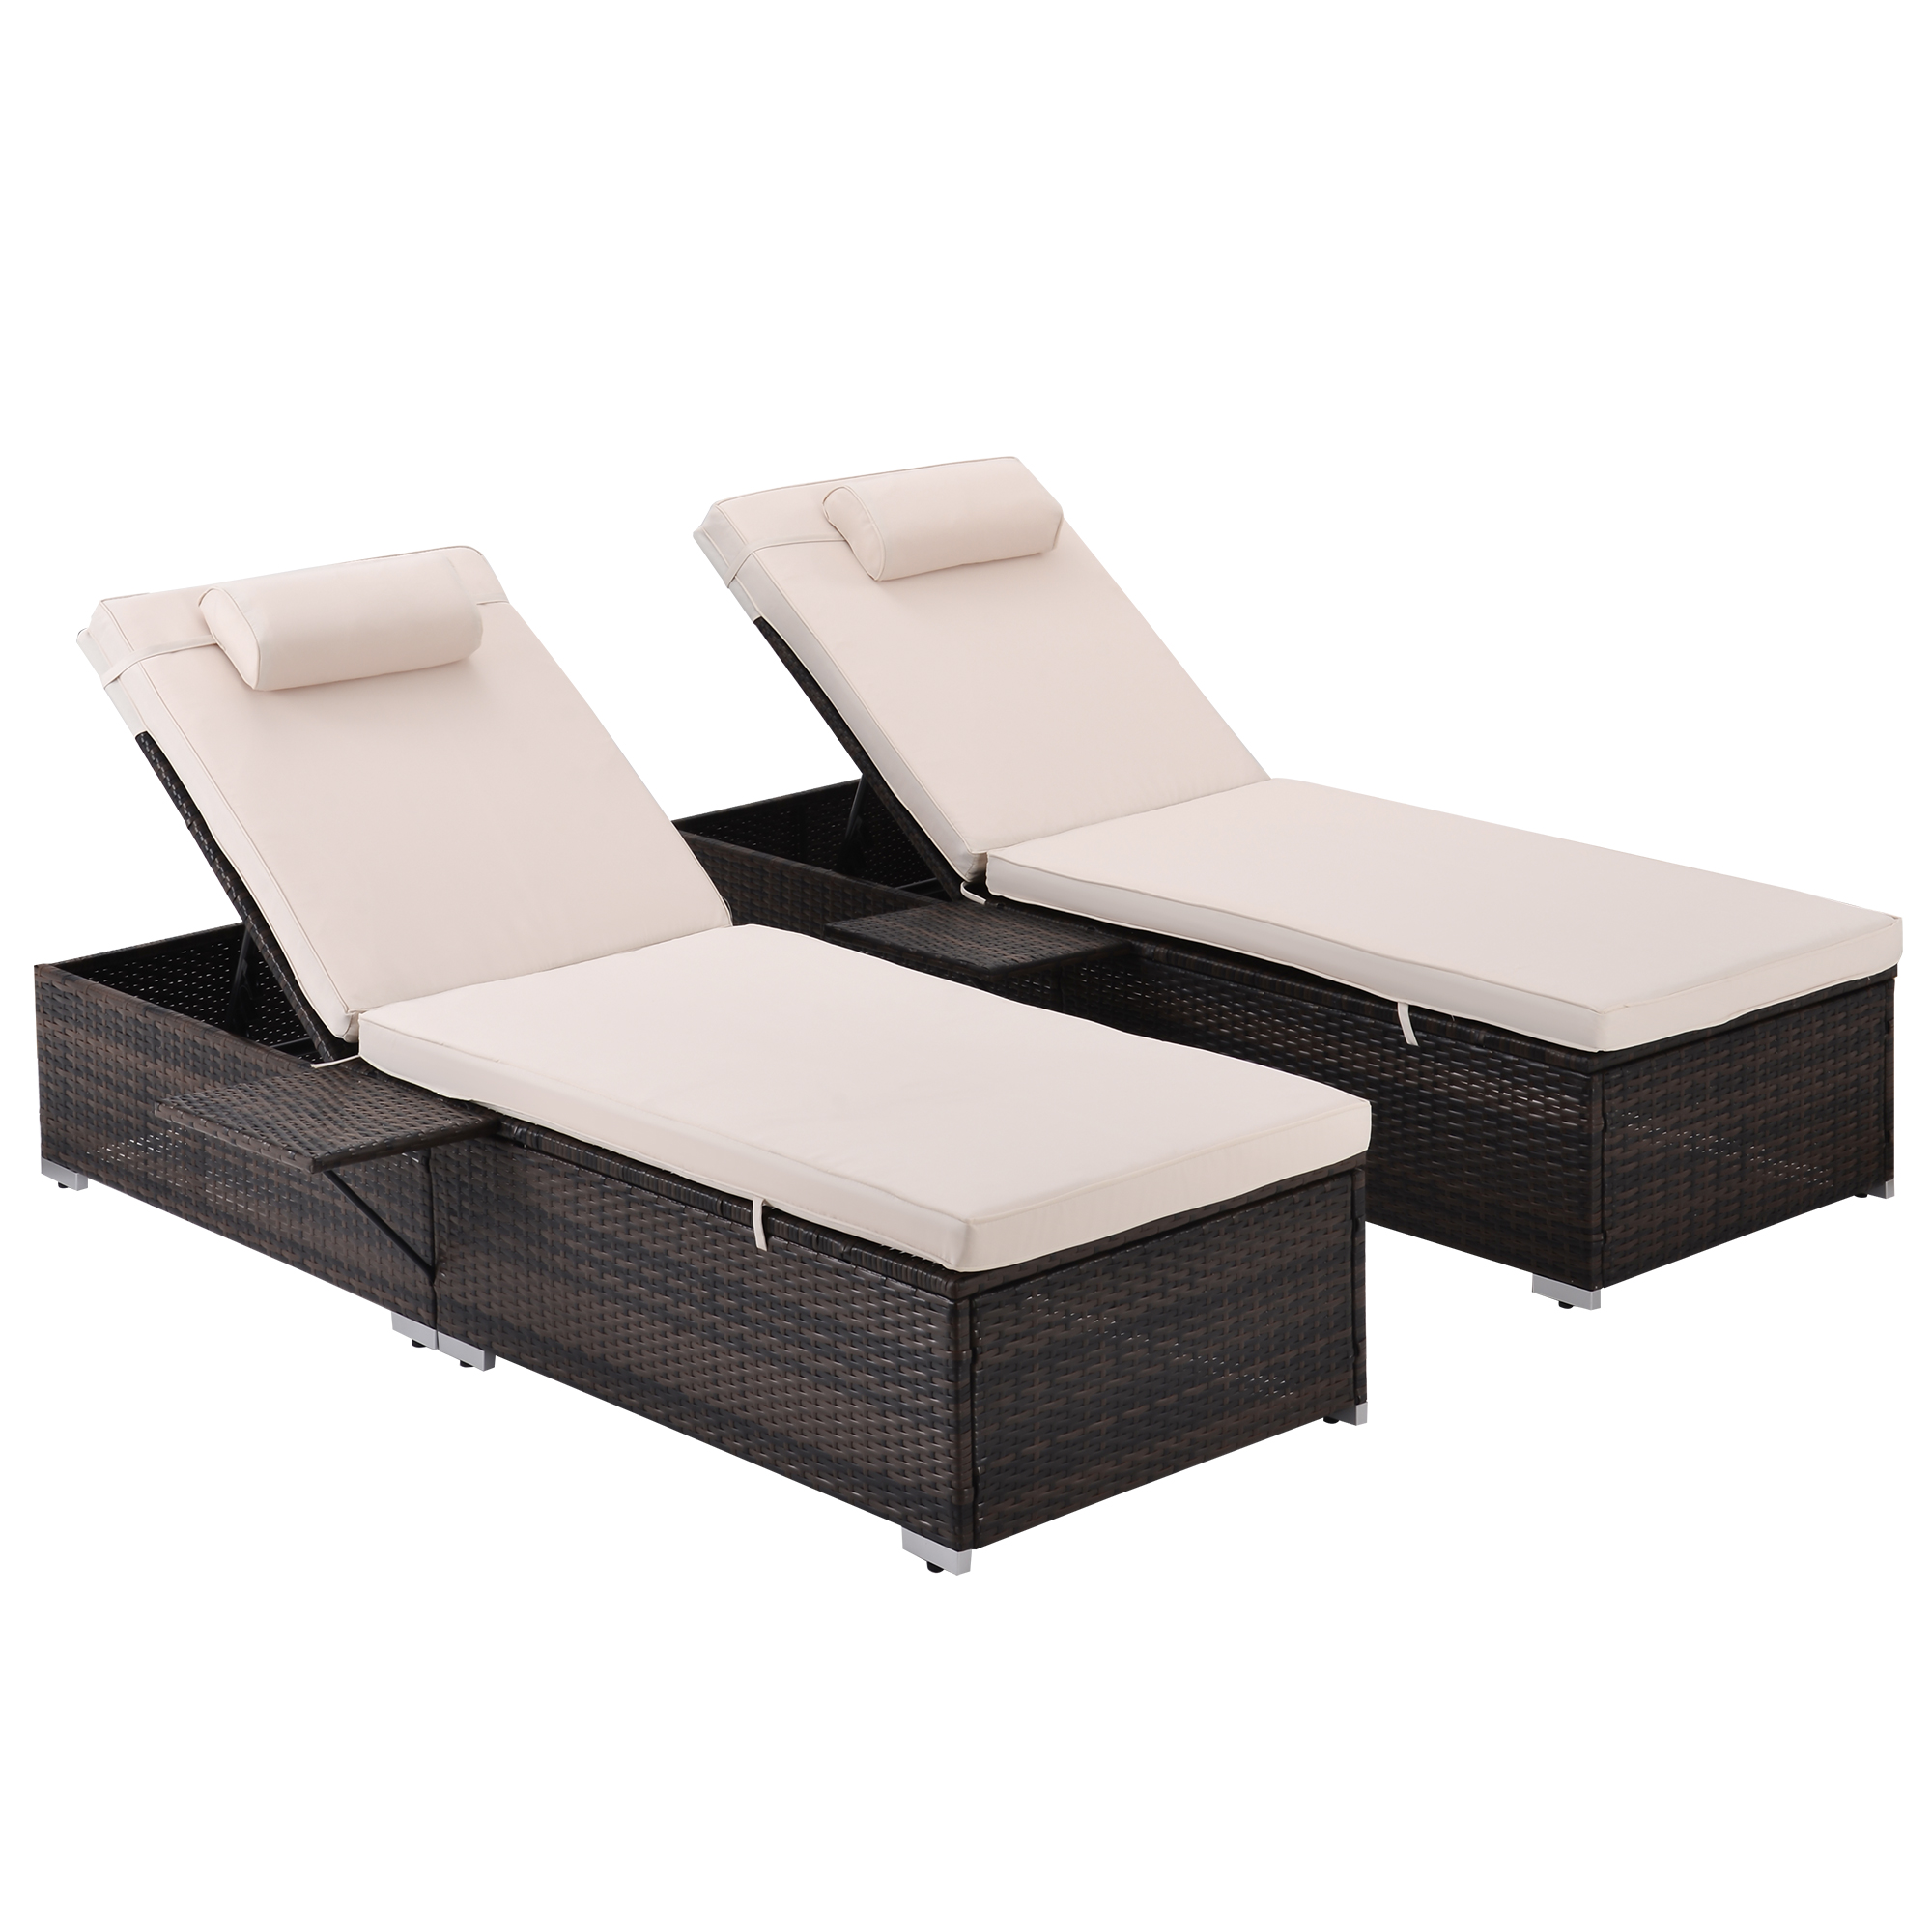 Set of 2 Rattan Chaise Lounge Chairs with Side Table, Outdoor Reclining Chairs Set W/Adjustable Backrest, Cushions and Head Pillow, Chaise Lounge Furniture Set for Poolside Beach Garden Patio, B63 - image 3 of 11